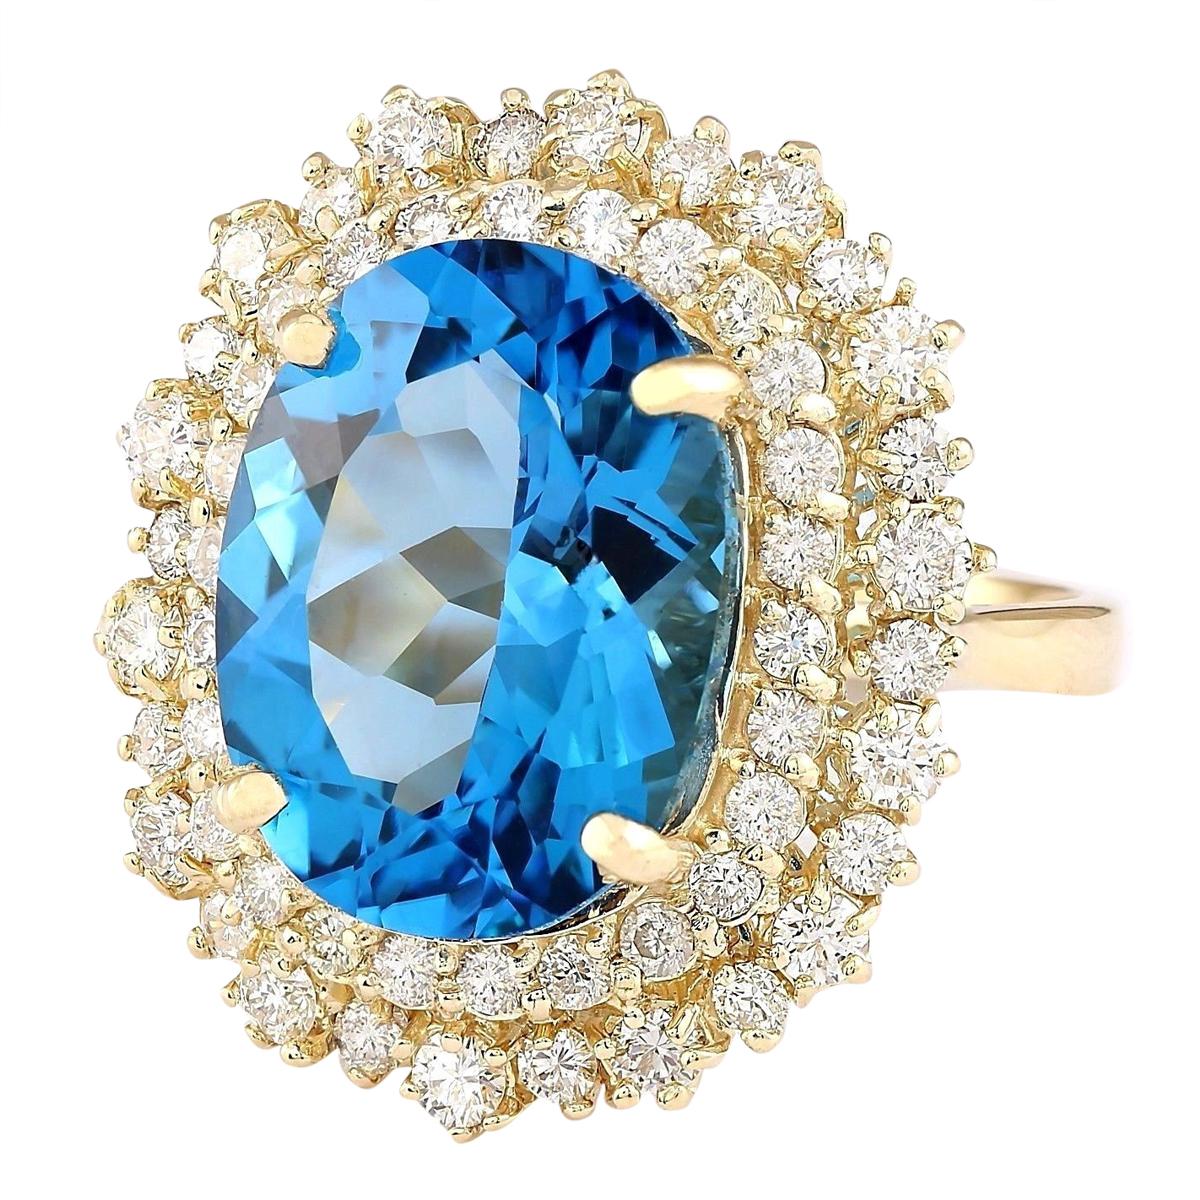 Introducing our stunning 14K Yellow Gold Diamond Ring, featuring a breathtaking 13.64 Carat Natural Topaz complemented by 2.00 Carat Diamonds. Stamped with 14K Yellow Gold, this ring boasts a total weight of 9.8 grams, showcasing exquisite